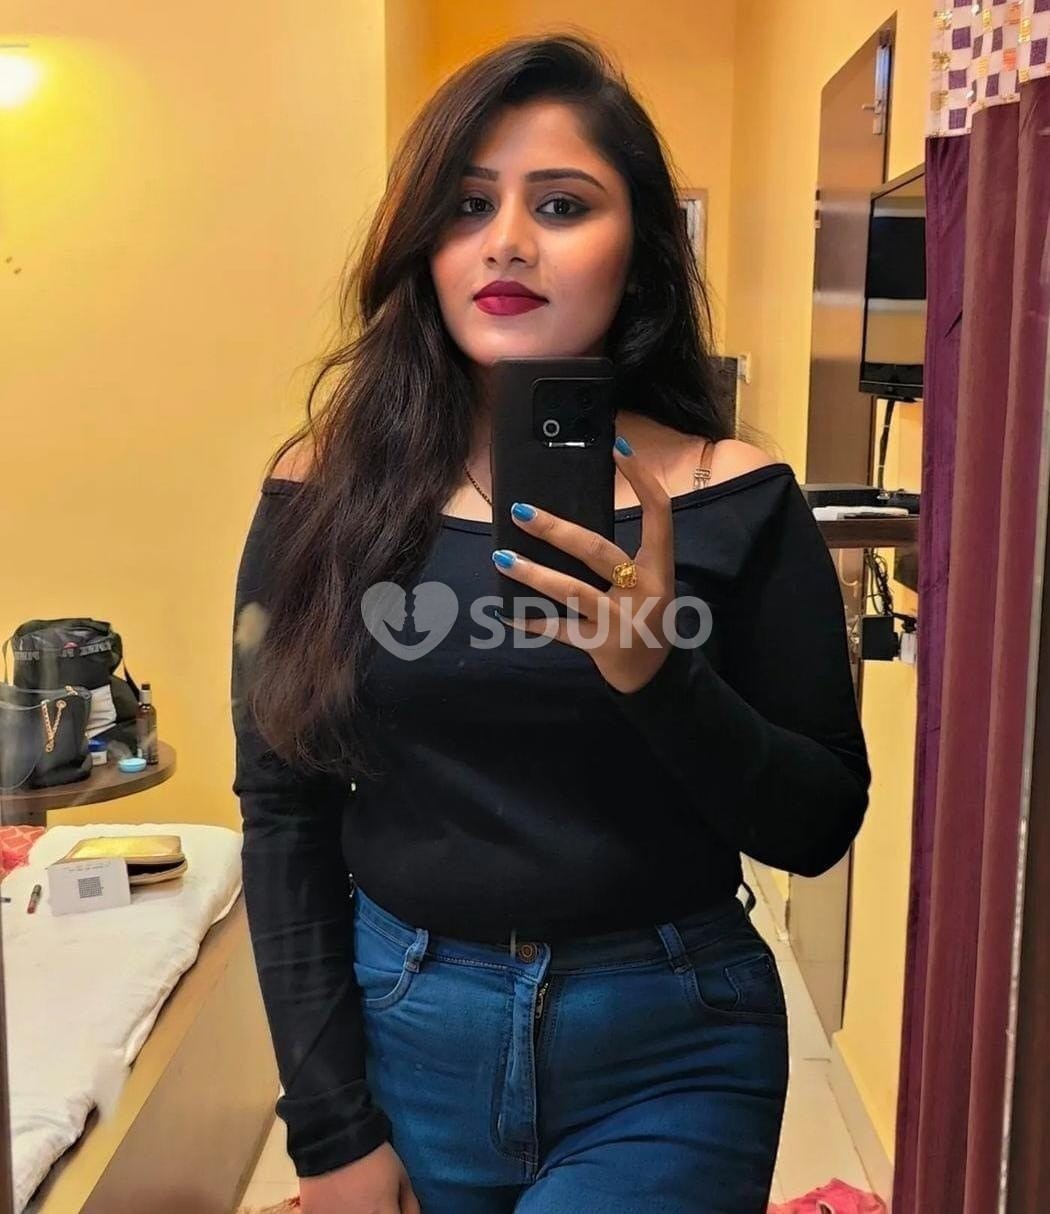 Shilpa ✨ good quality ❣️ Full safe and secure service available